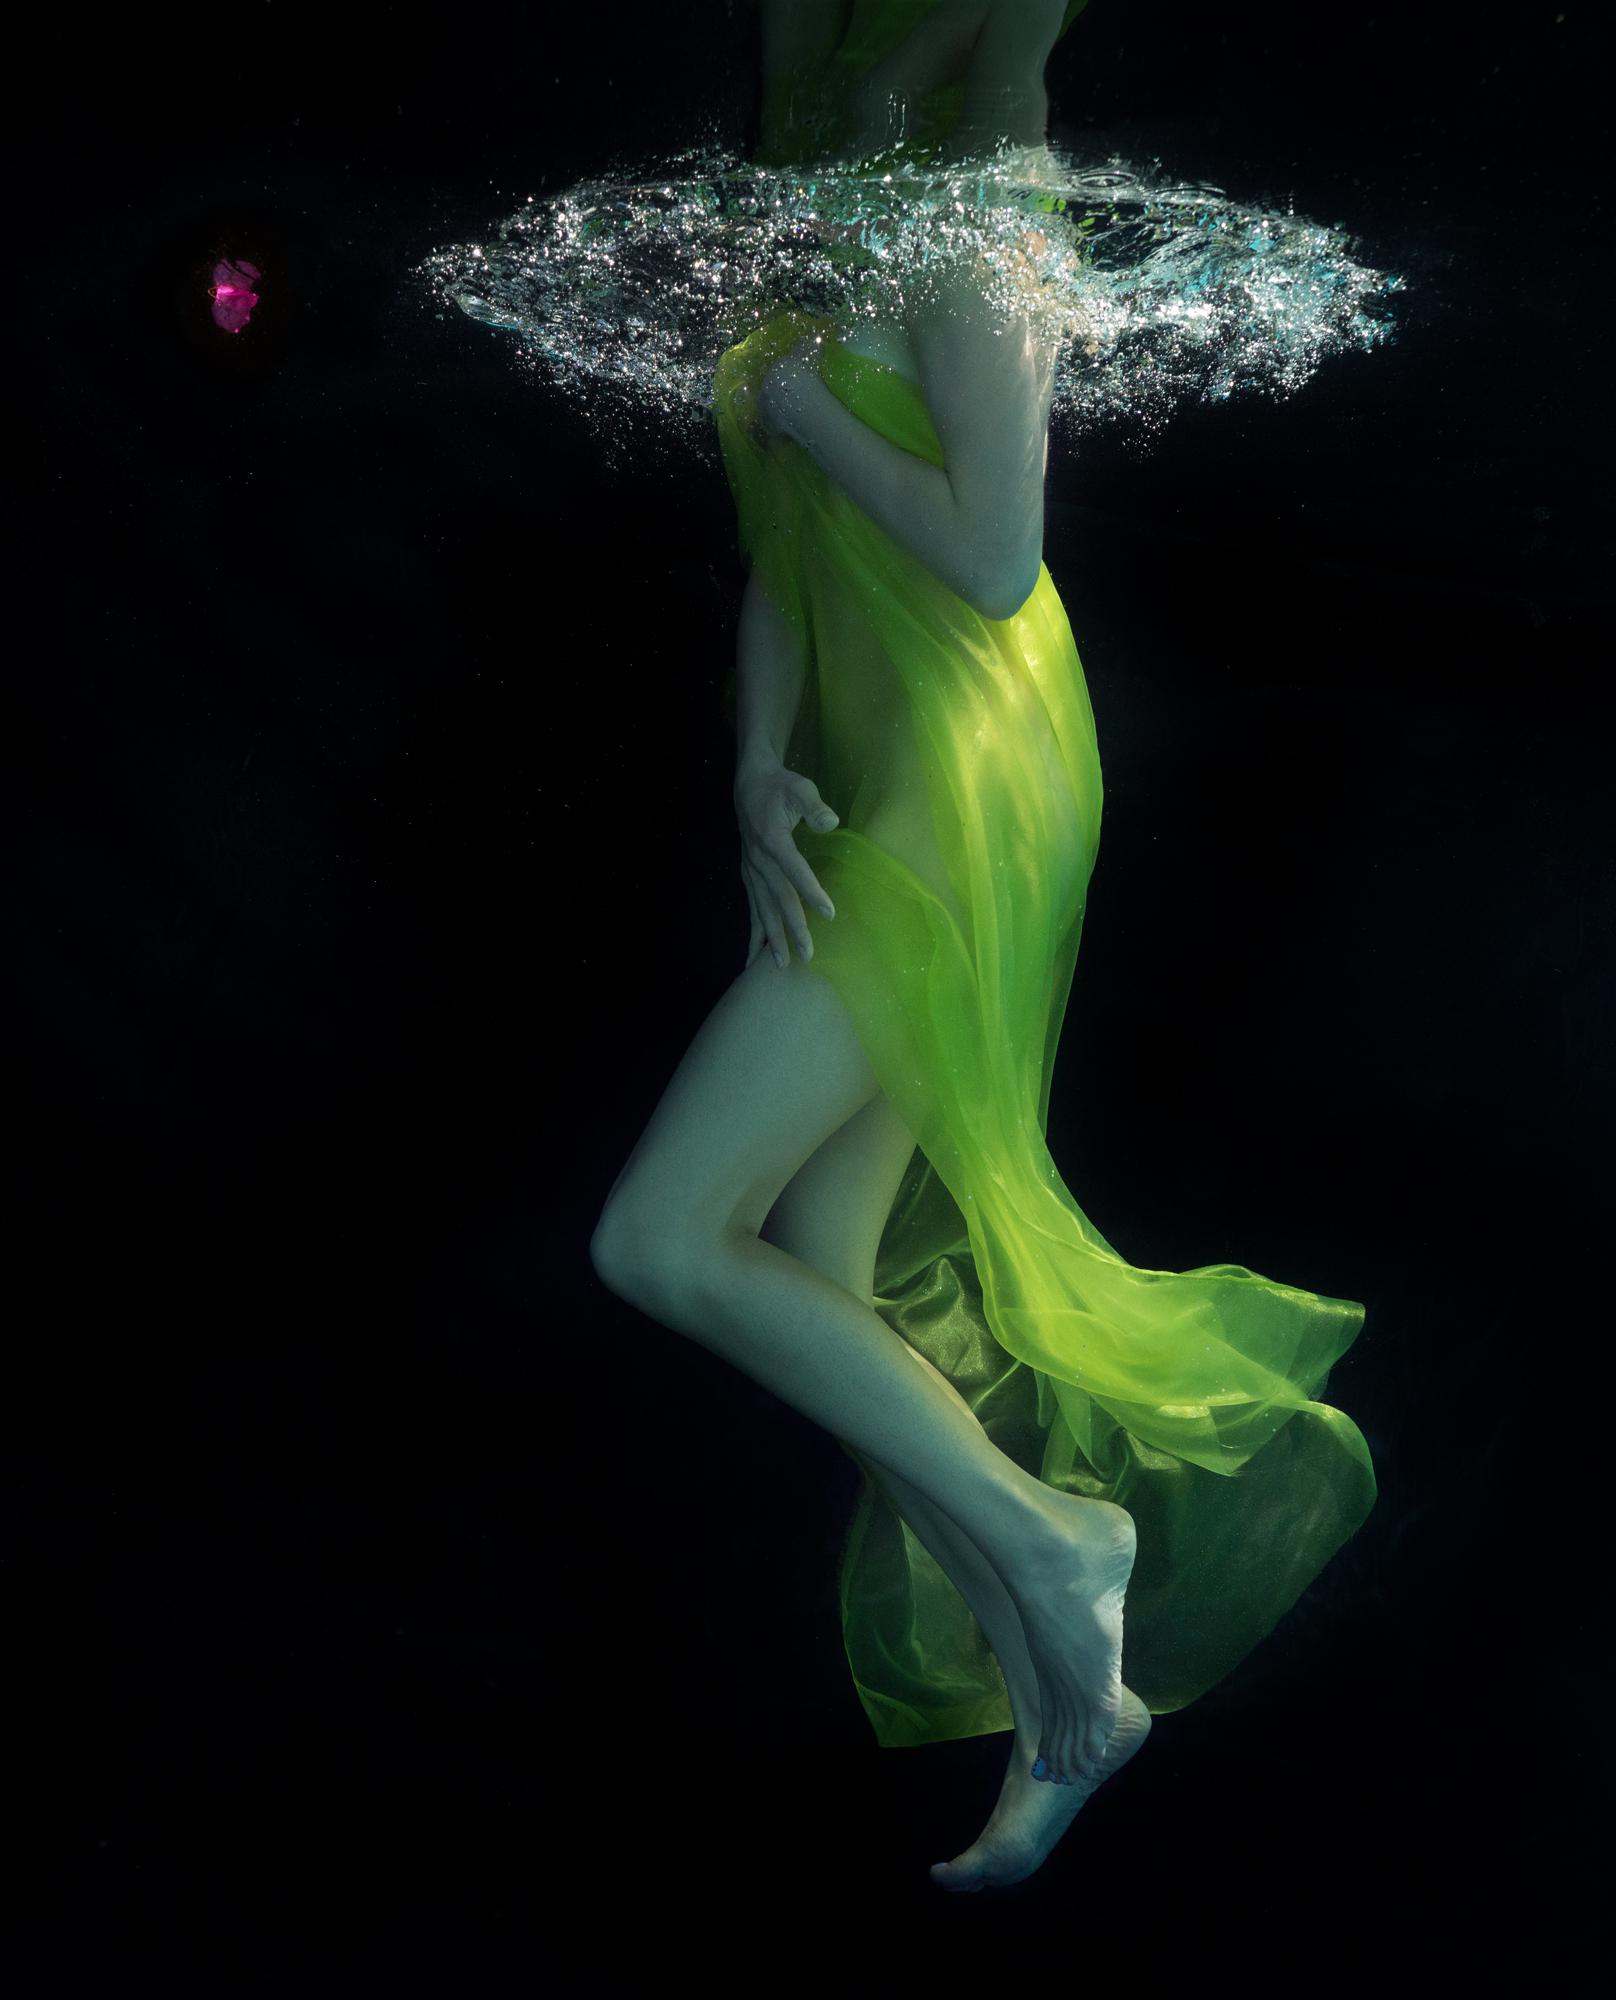 Alex Sher Figurative Photograph - Green Bud - underwater photograph - print on paper 28" x 35"